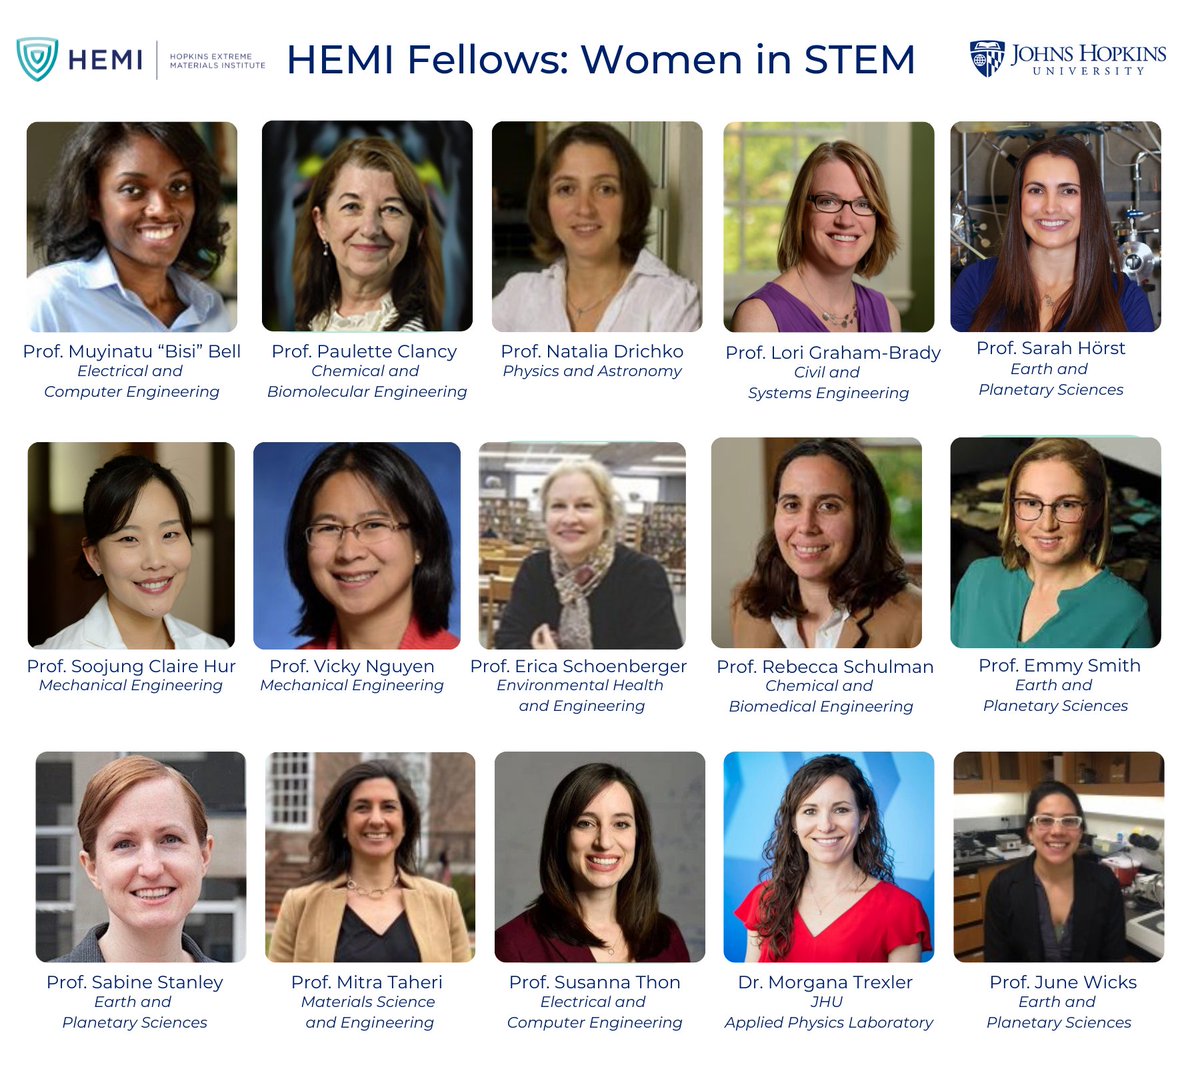 Happy International Women's Day to all women in STEM, especially our own HEMI Fellows! See how these women are making a difference in their fields: hemi.jhu.edu. #internationalwomensday #HopkinsEngineer #WomenInSTEM